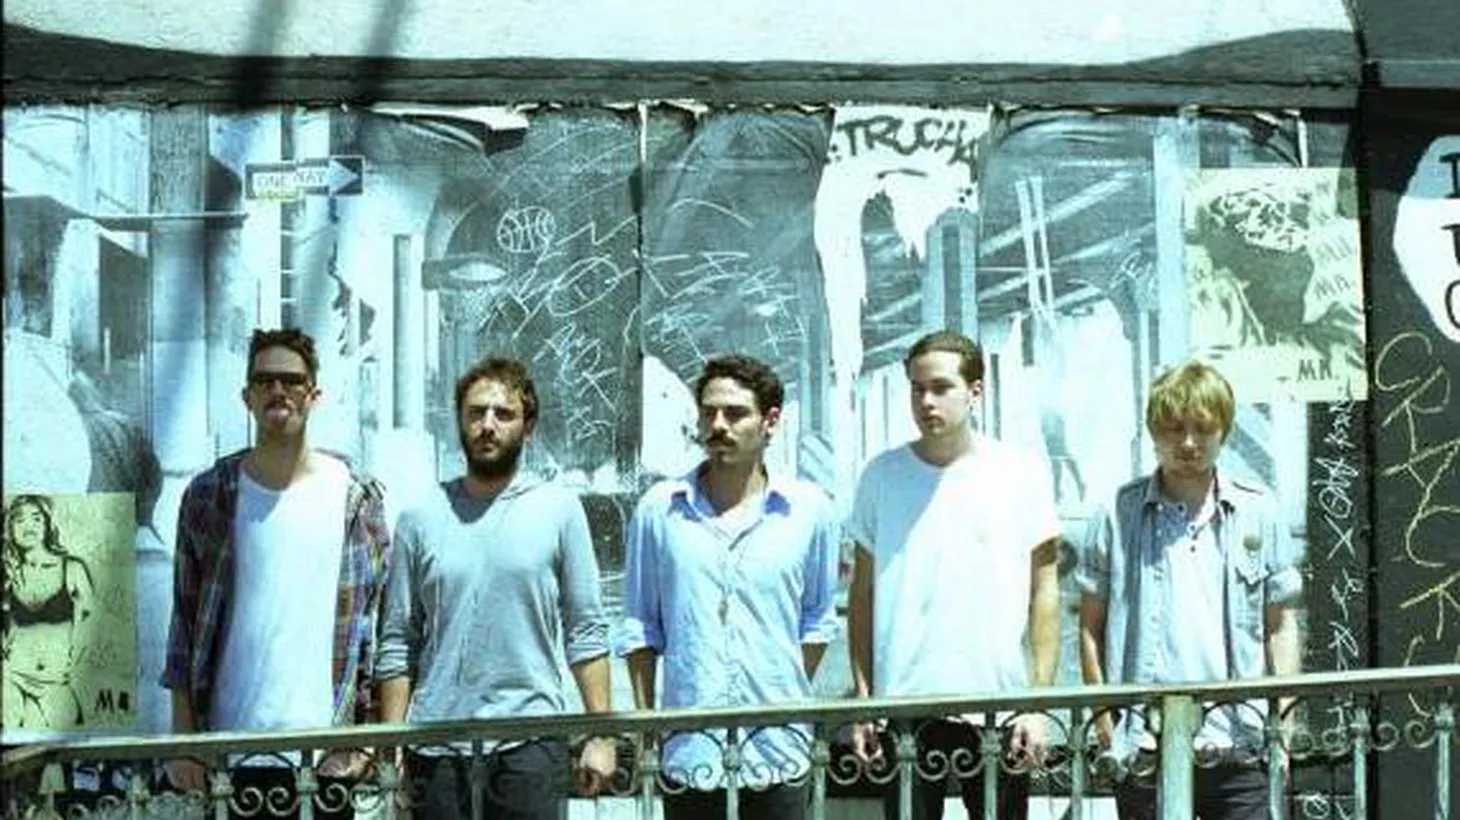 Local Natives broke out big in 2010, touring the world nonstop and garnering international acclaim for their debut, Gorilla Maner. We'll catch up with the LA band on Morning Becomes Eclectic at 11:15am as they get ready to make their debut at Disney Hall.